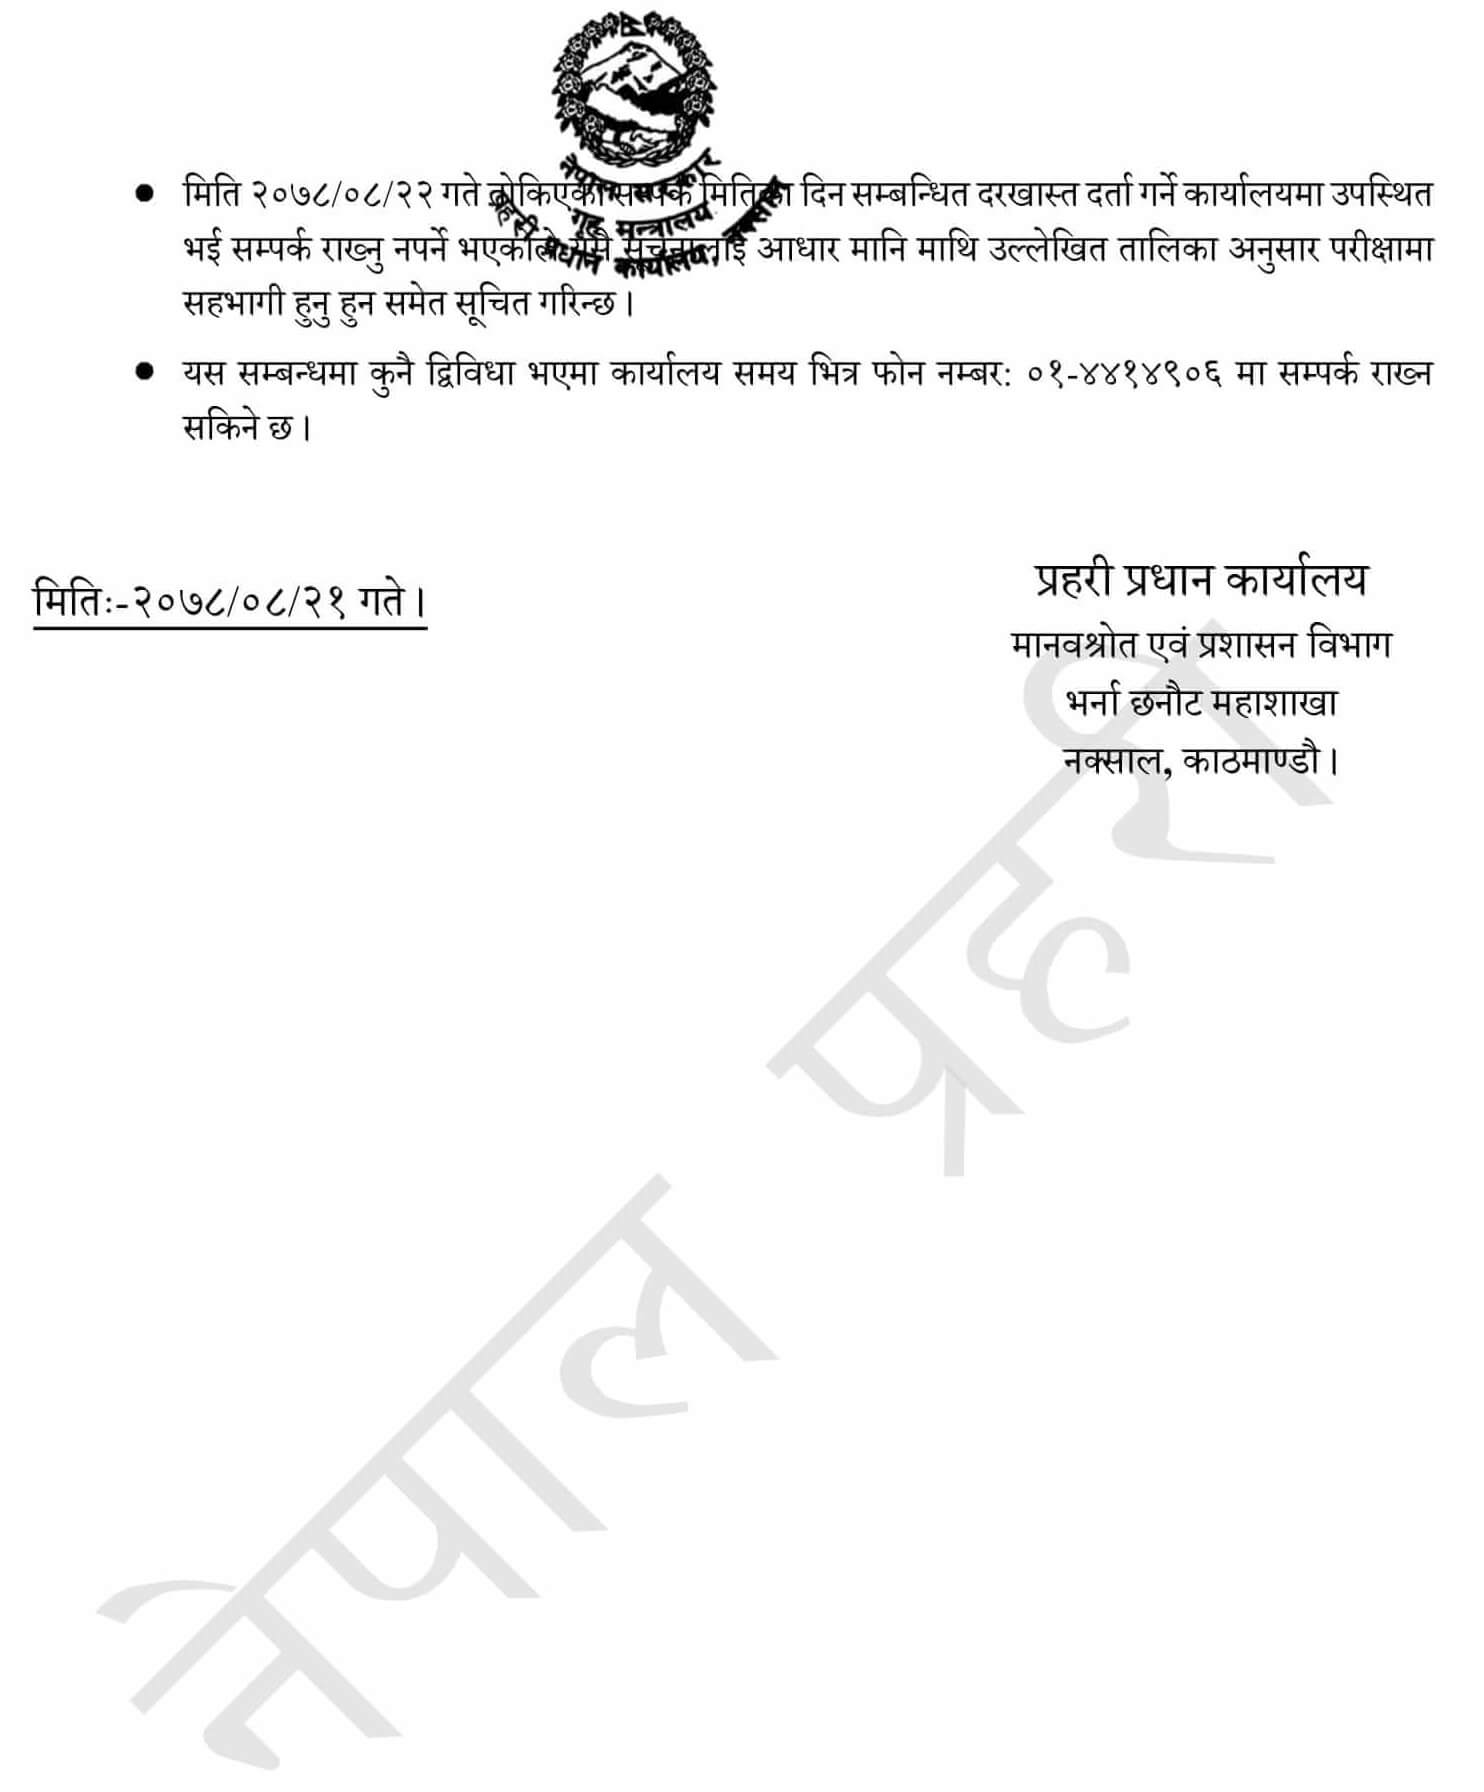 Nepal Police ASI Physical Exam Schedule 2078